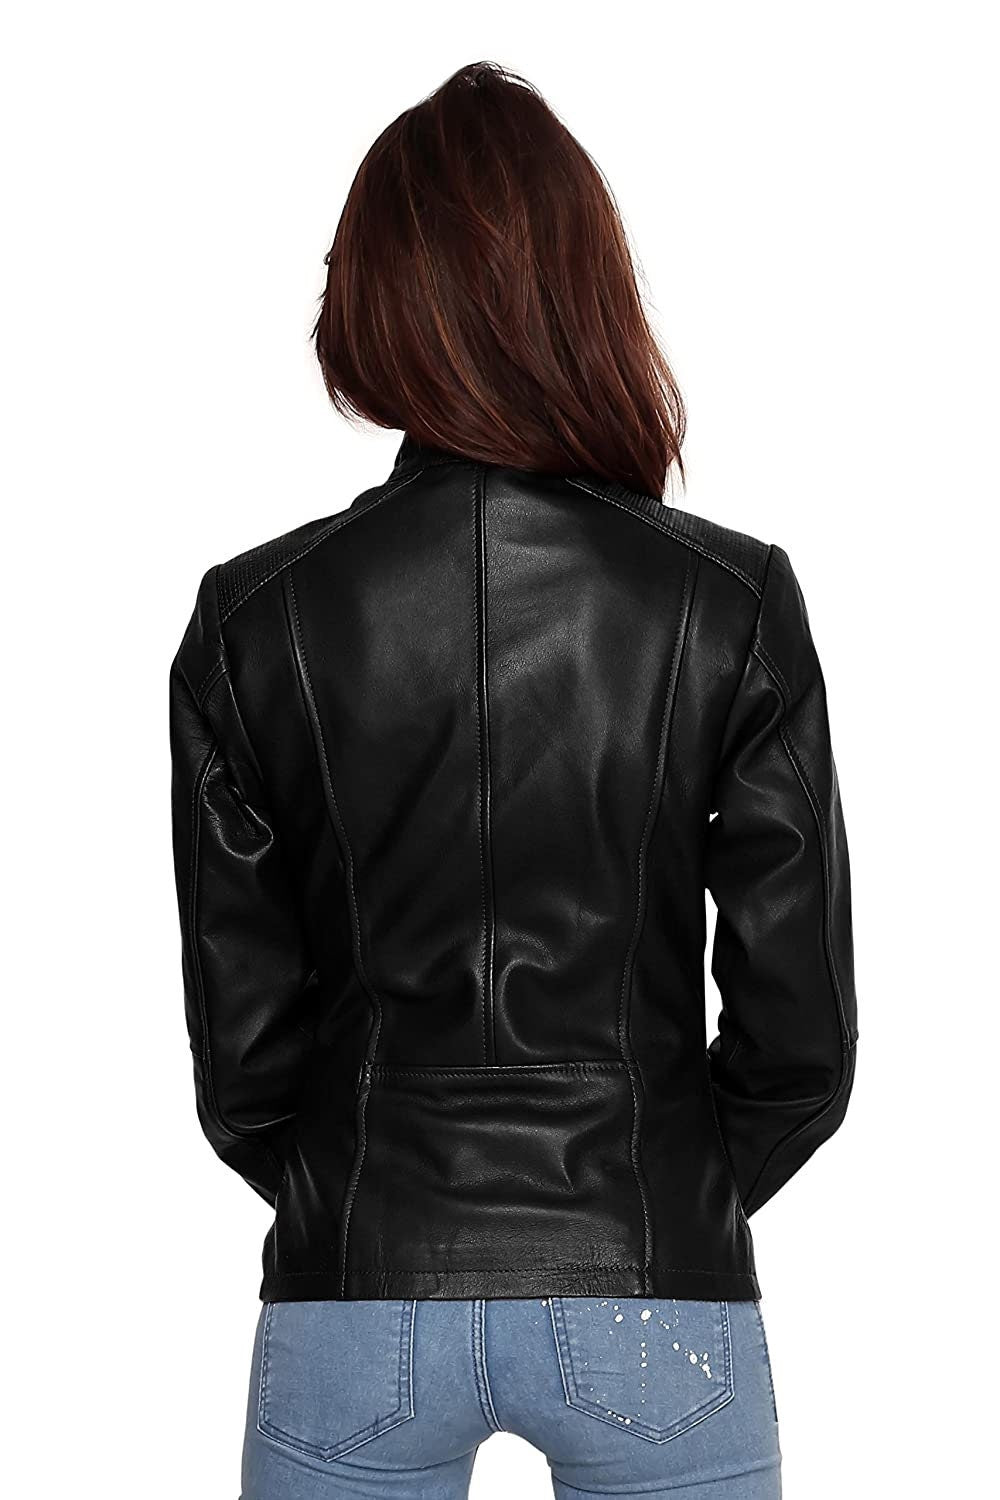 Custom Leather Jackets for Men & Women Online in India at price 5500/-